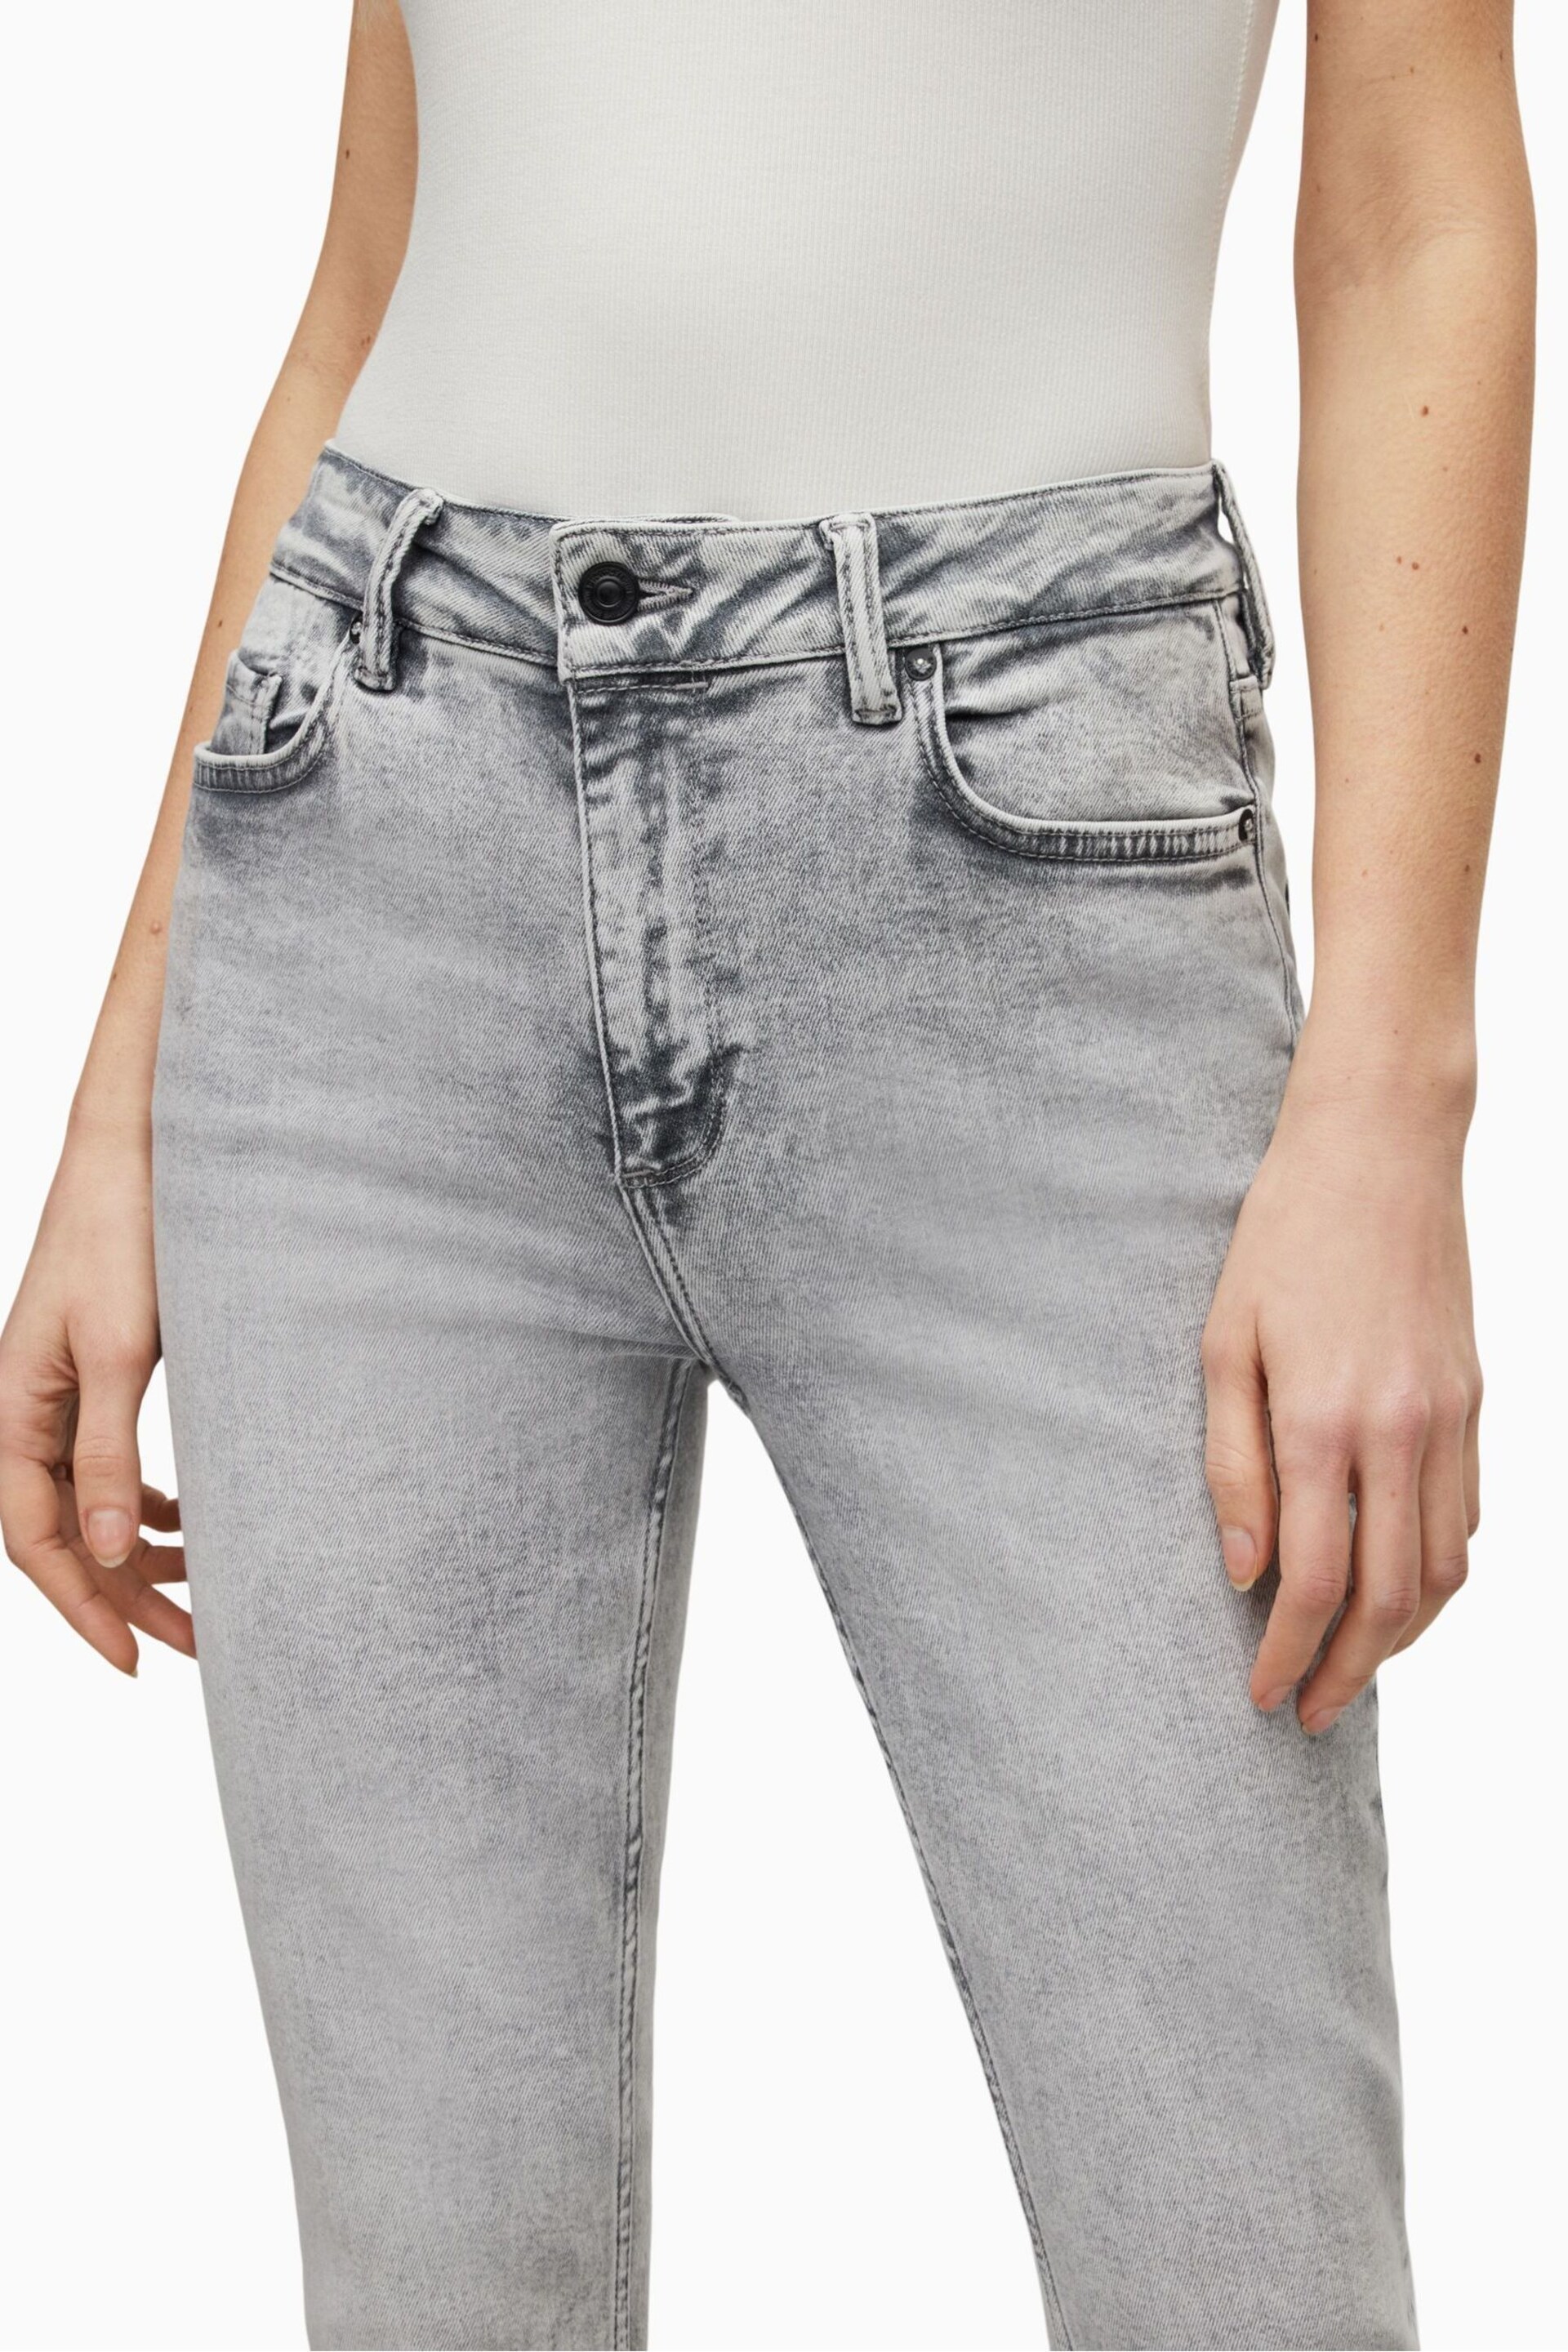 AllSaints Grey Dax Jeans - Image 4 of 6